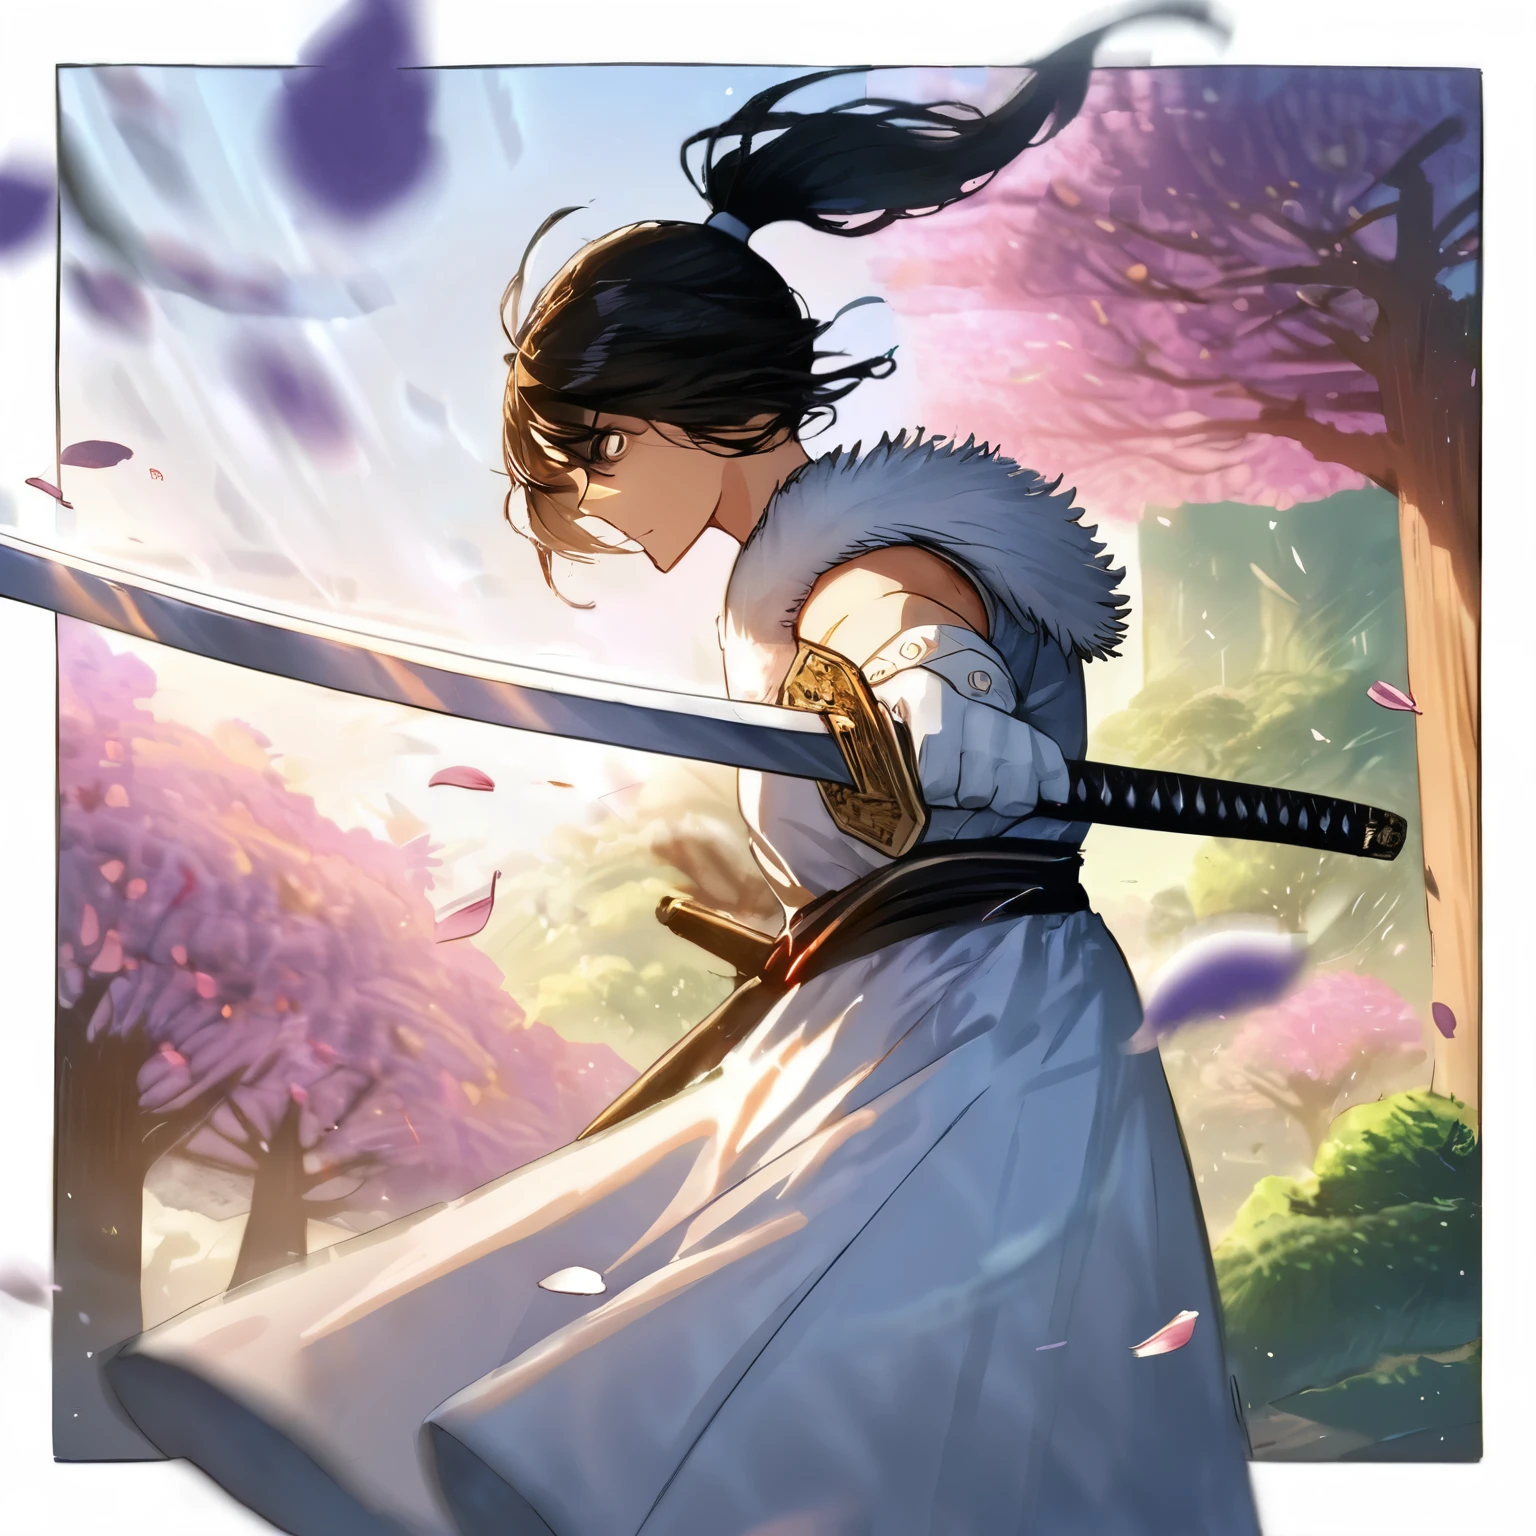 (windy),(blood),(motion blur),(dress in white),Petals fluttering in the wind, shining swords, helpless expression, anger, fighting with death, very detailed expression, very detailed petals,ponytail, 2swordsman fighting,fight,gongfu,stand in trees, 2swordsman stood in a peach tree forest with petals dancing,petals , detailed ,completing the stable diffusion of serenity and contentment,masterpiece, best quality,masterpiece, best quality, swordman,holding a sword(trees:0.5),(eagle:0.5), (bamboo:0.2) fighting stance, 1man, glowing, solo, weapon, sword, tree, holding, gloves, outdoors, sheath, border, holding weapon, black hair, holding sword, fur trim, looking away,look at view